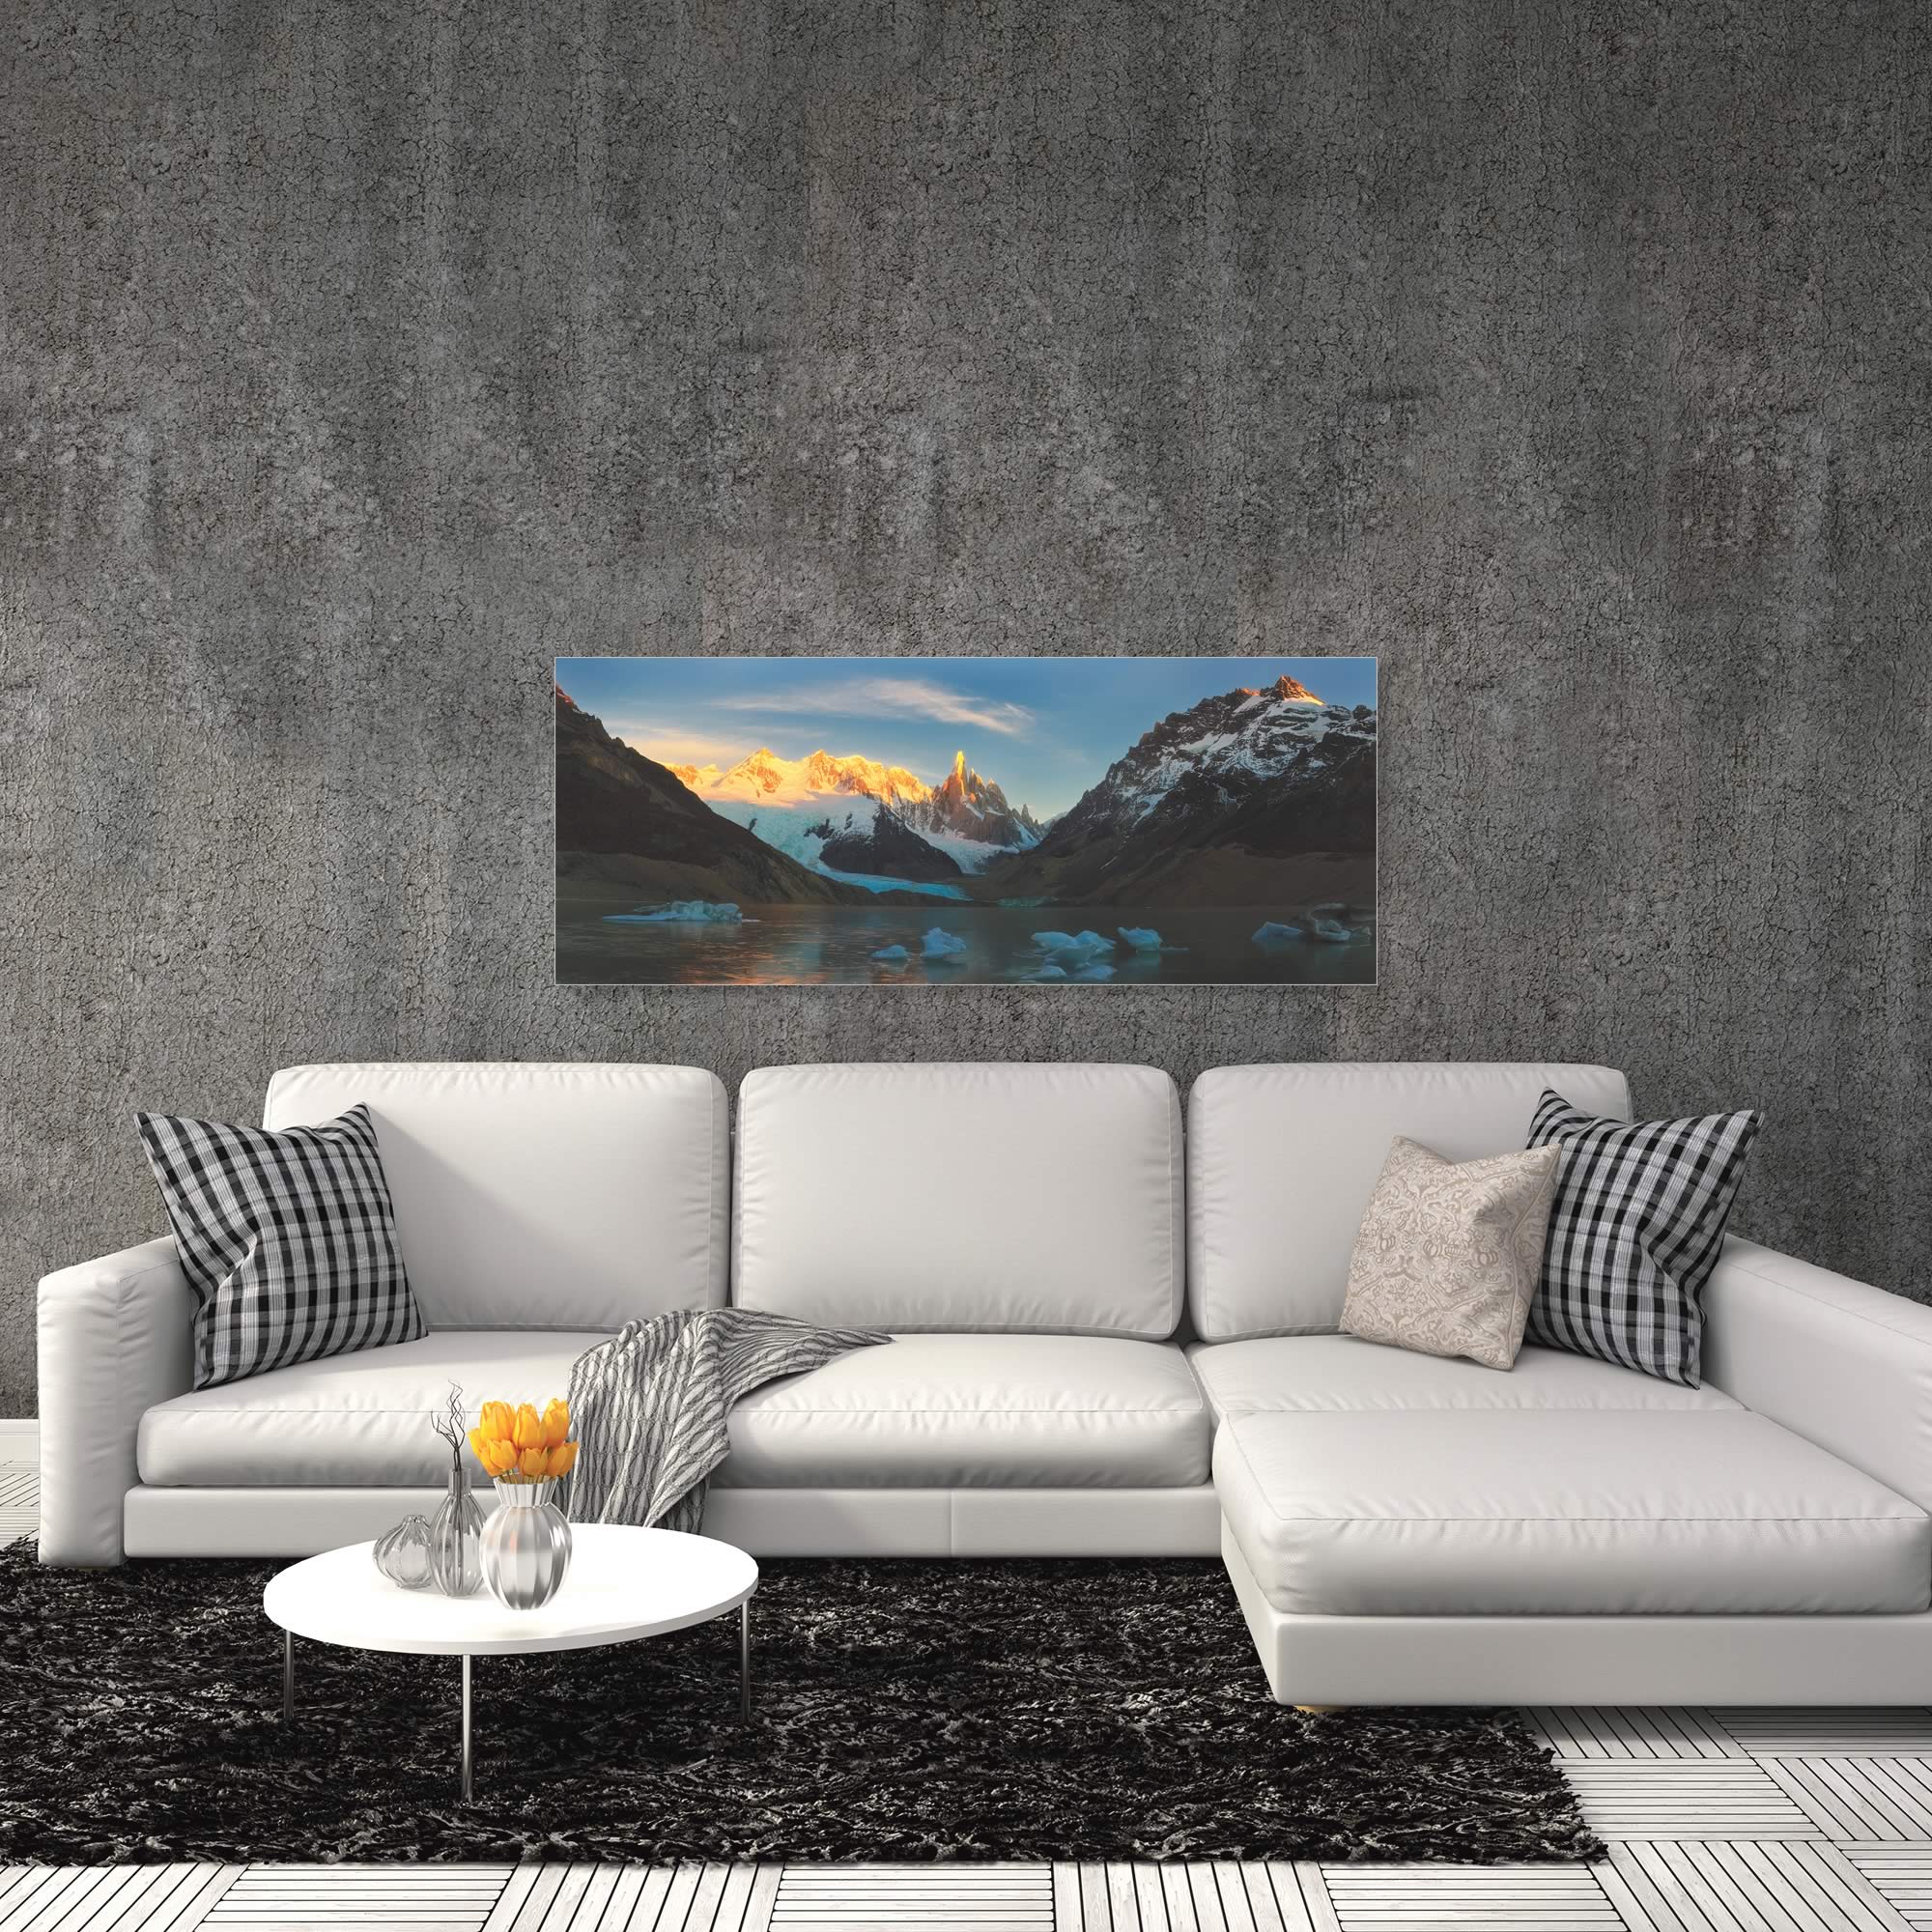 Morning Light at Cerro Torre by Yan Zhang - Mountain Photography on Metal or Acrylic - Alternate View 1